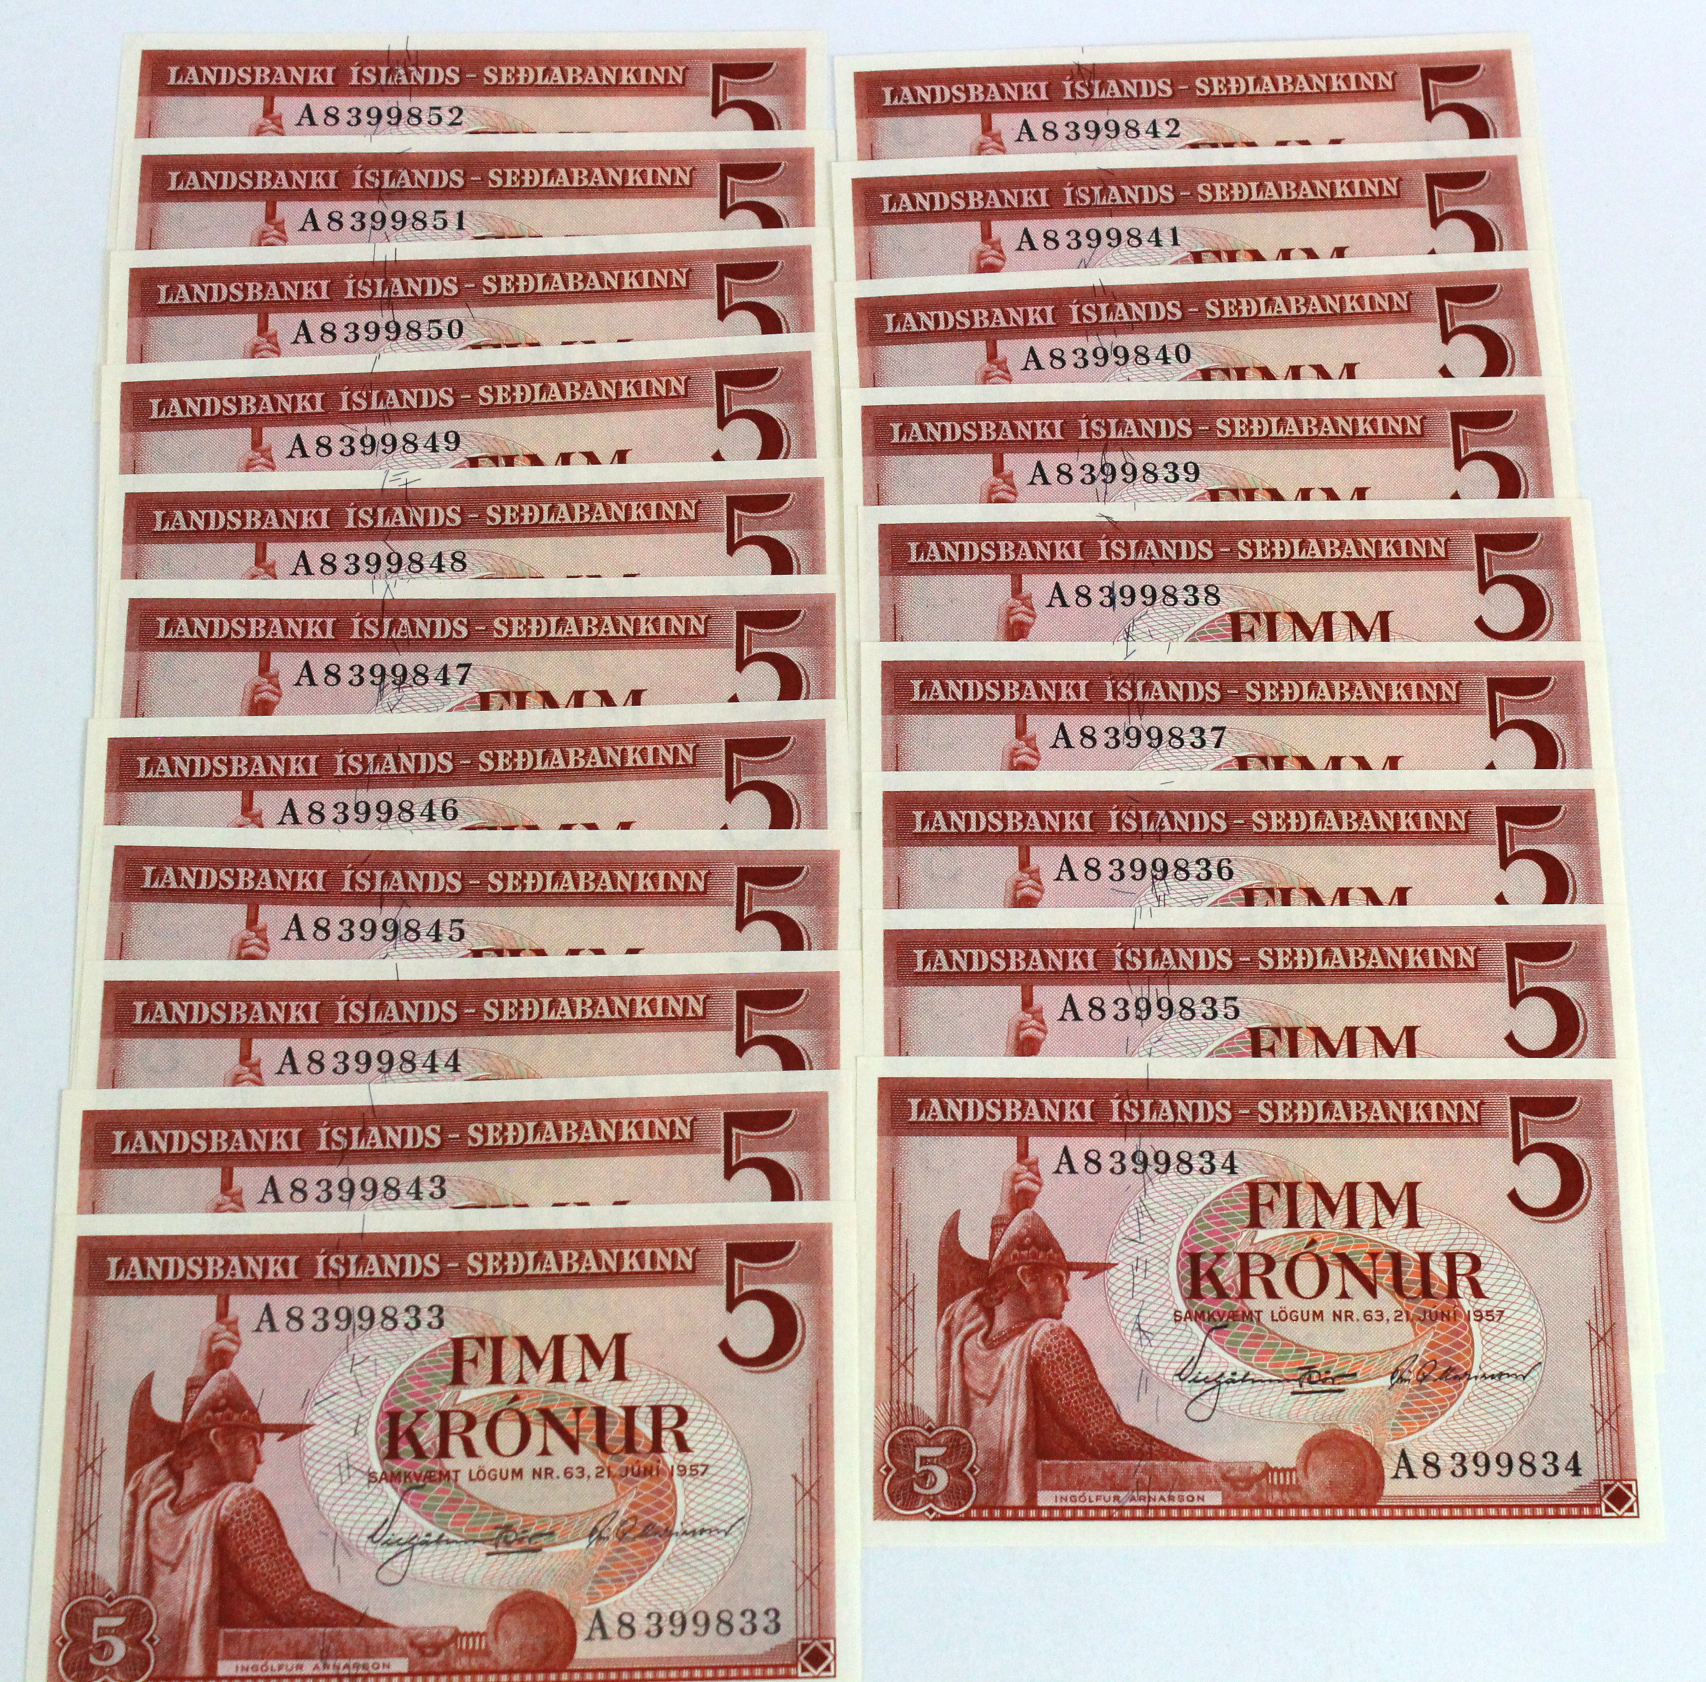 Iceland 5 Kronur (20) dated 1957, a consecutively numbered run of 20 notes, serial A8 399833 - A8